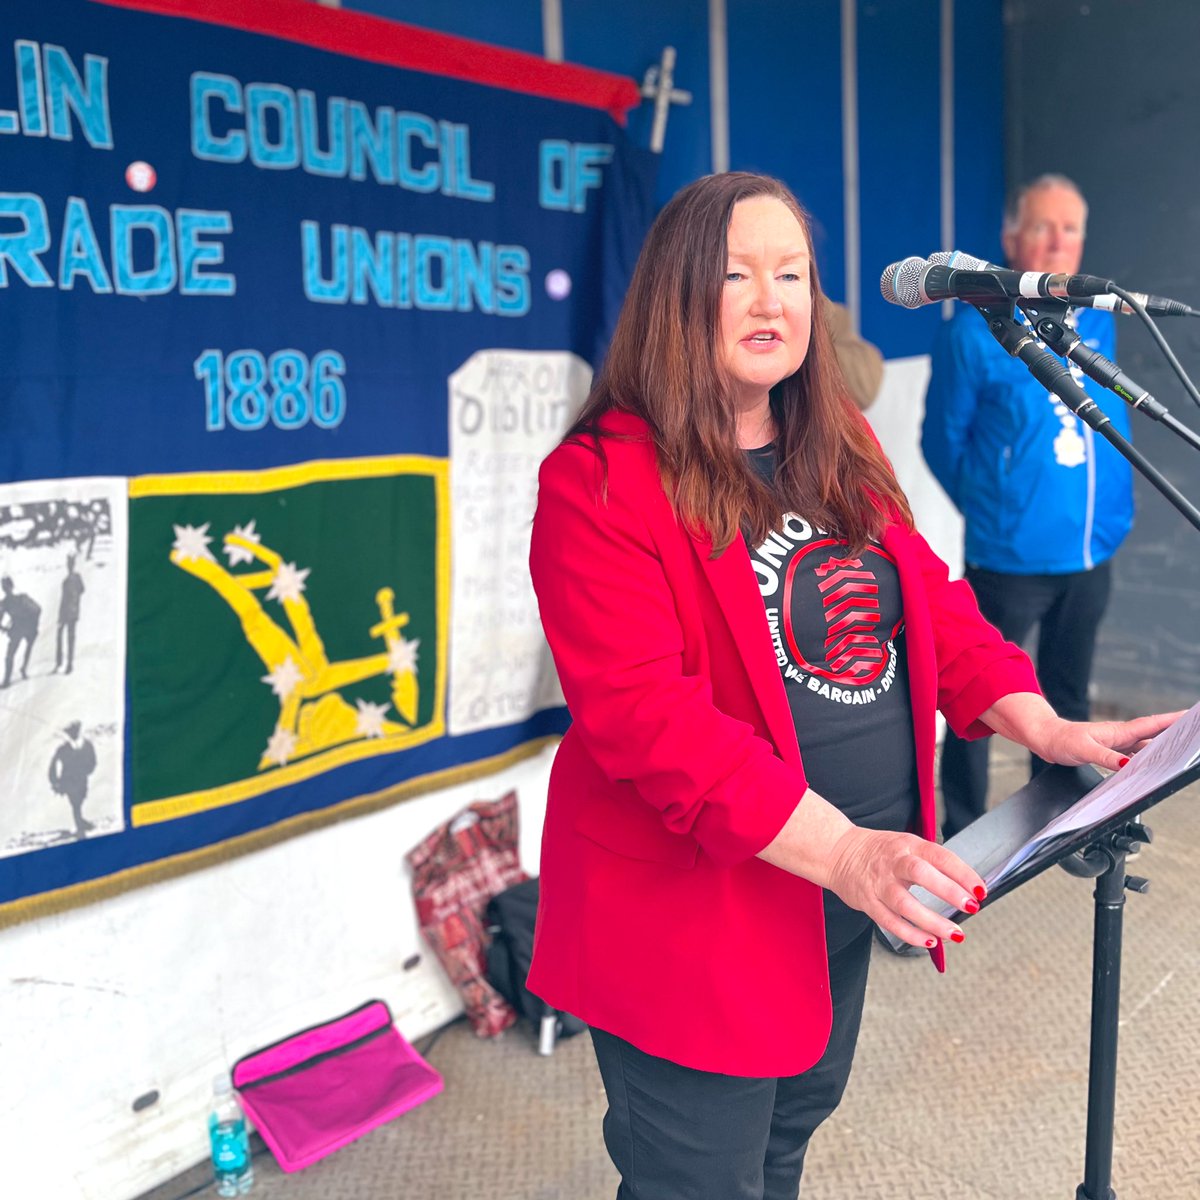 THE PAST WE INHERIT BUT THE FUTURE WE BUILD!

“If we want to organise the next generation into the trade union movement, we have to turn the tide on the right to organise and demand the respect we deserve at work.”

- #MayDay speech from @EthelBuckley 

#RespectatWork #Unionise